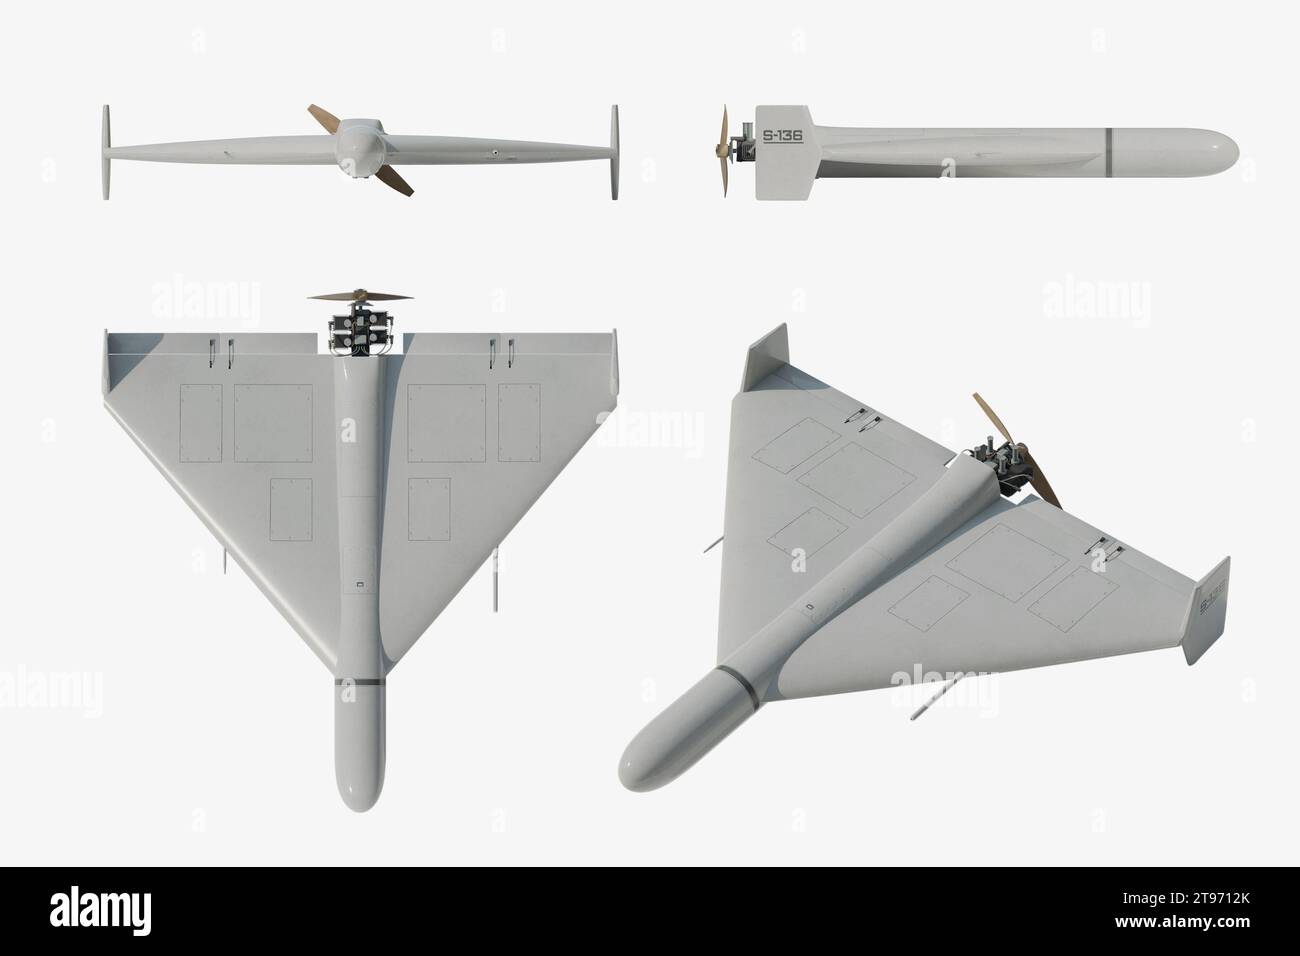 Shahed-136 (Geran-2) loitering munition drone: front, back, side and perspective view - 3d rendering Stock Photo